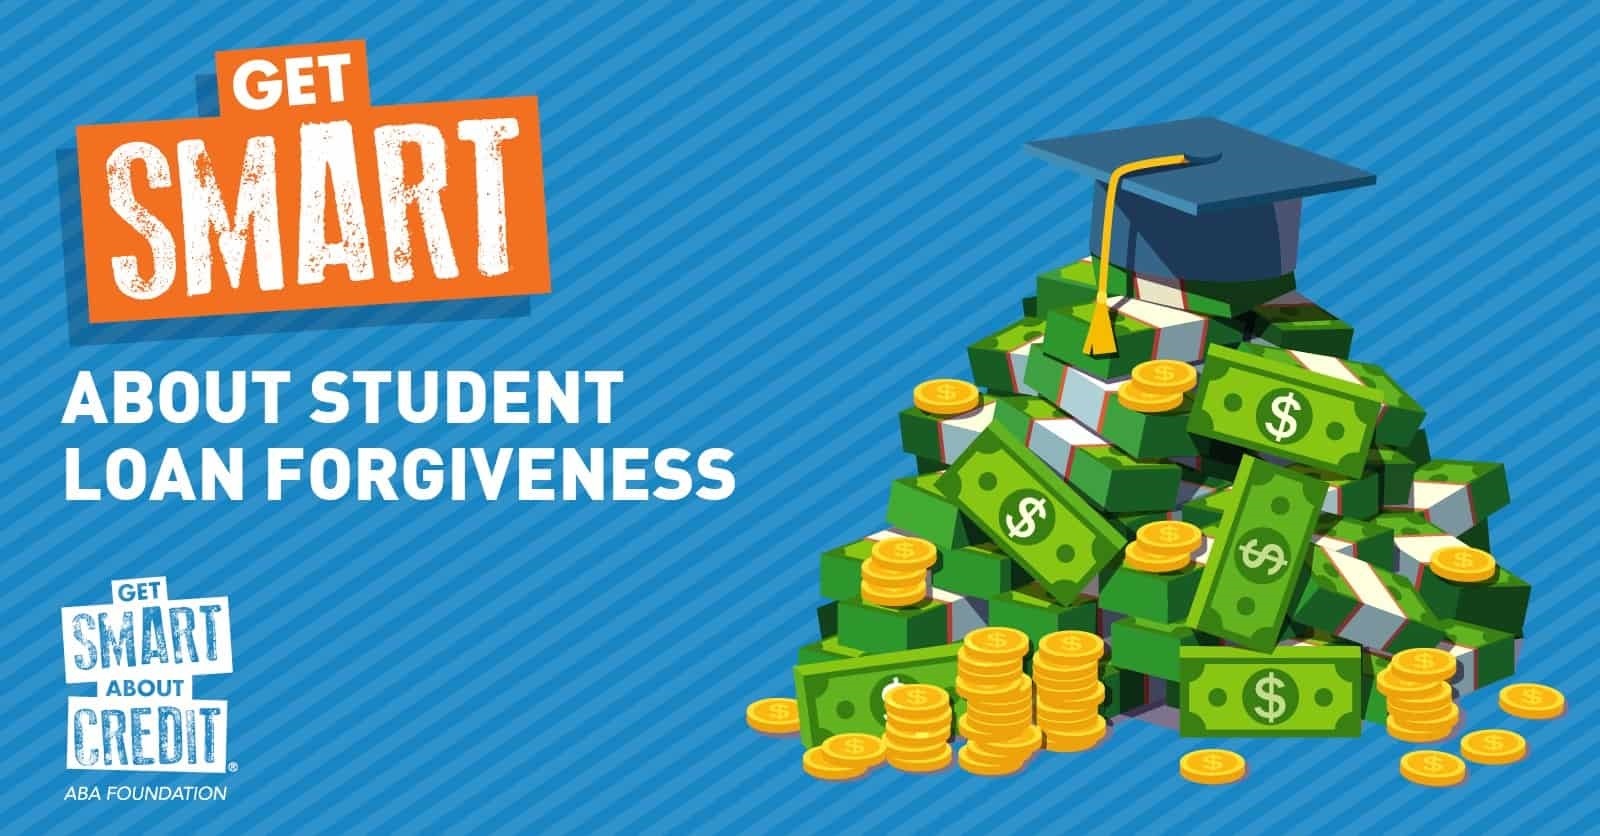 Get smart about student loan forgiveness image